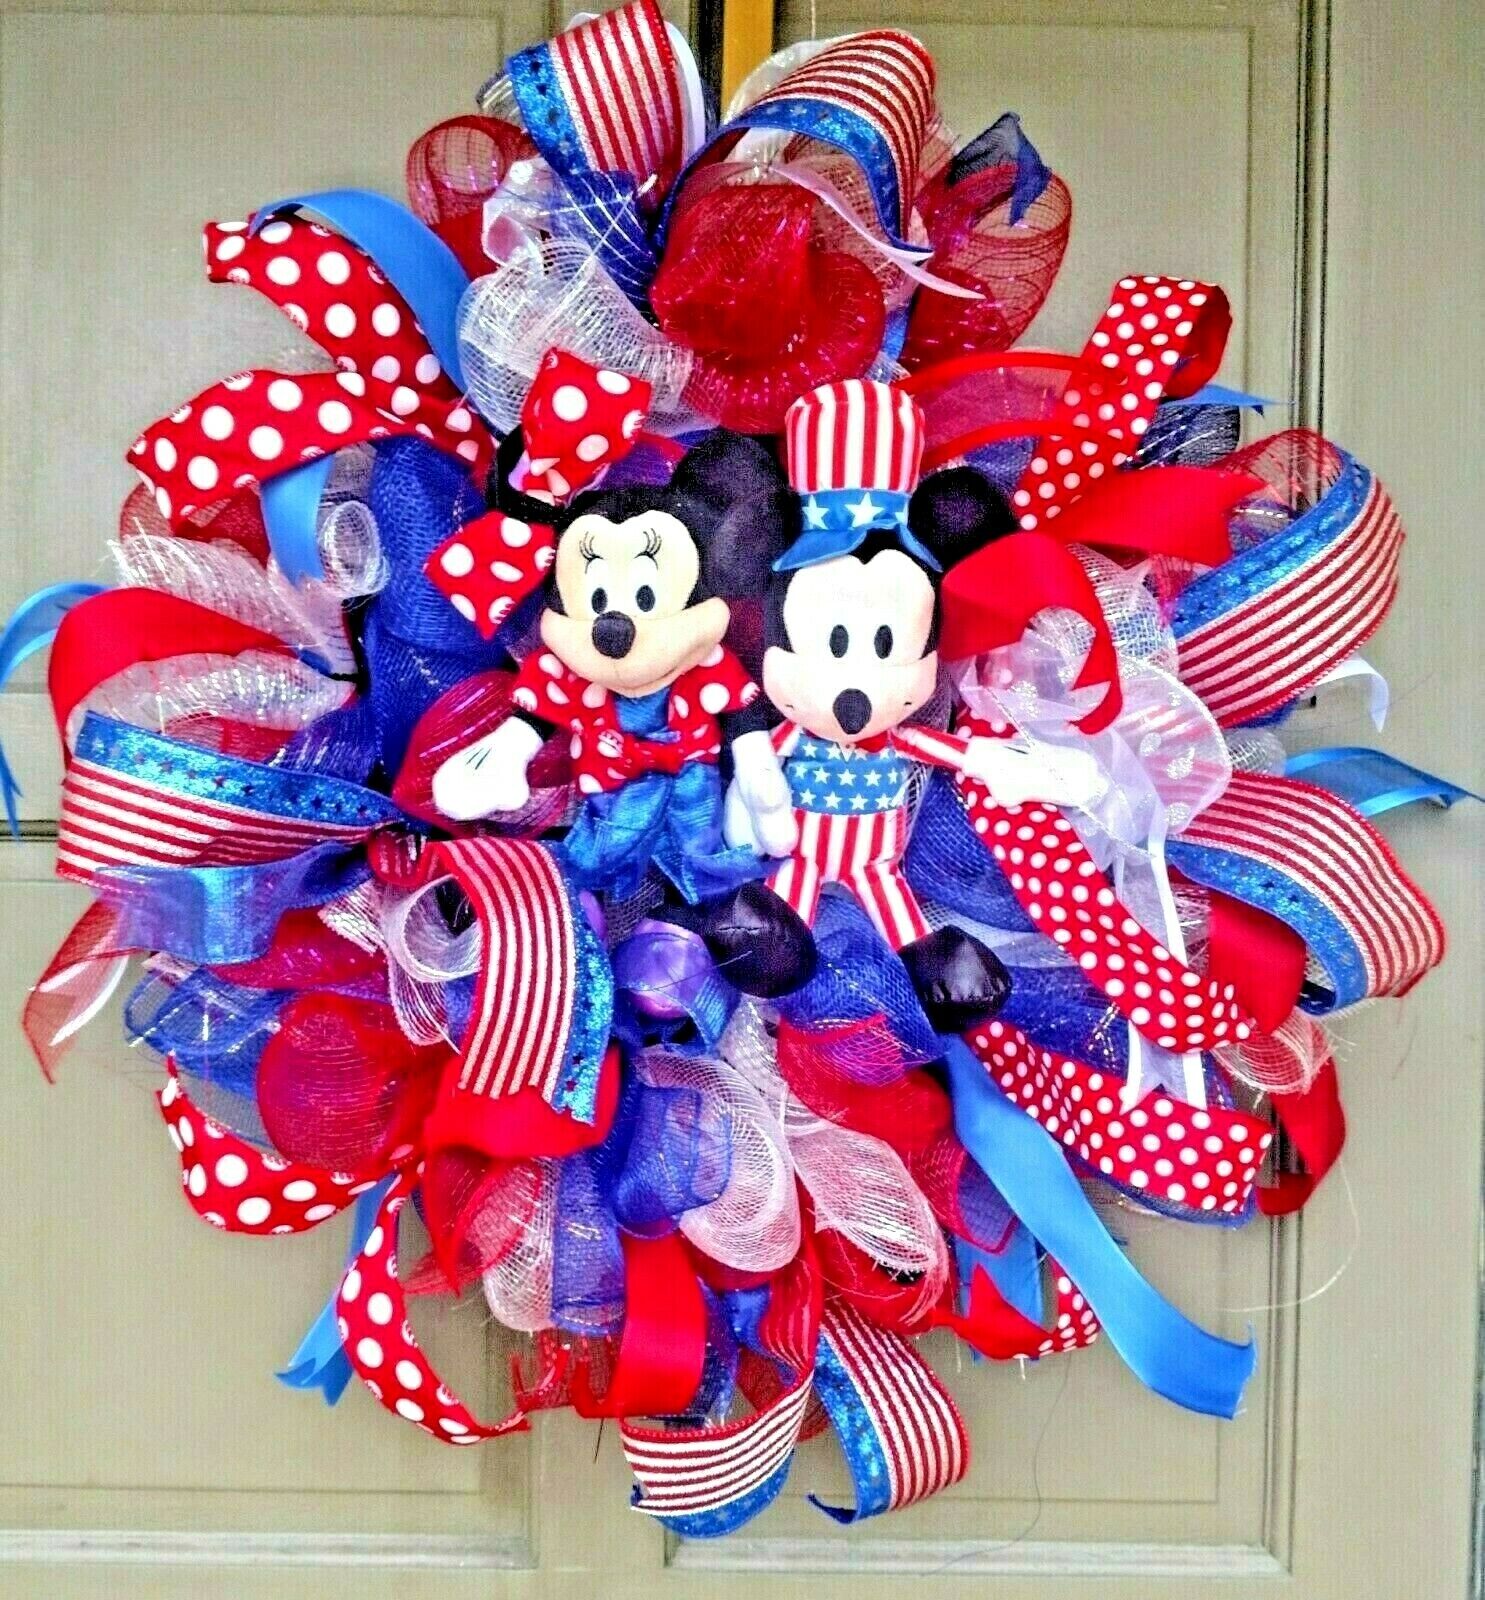 Large Handmade Patriotic Mickey and Minnie Mouse Door Wreath July 4th Decor 